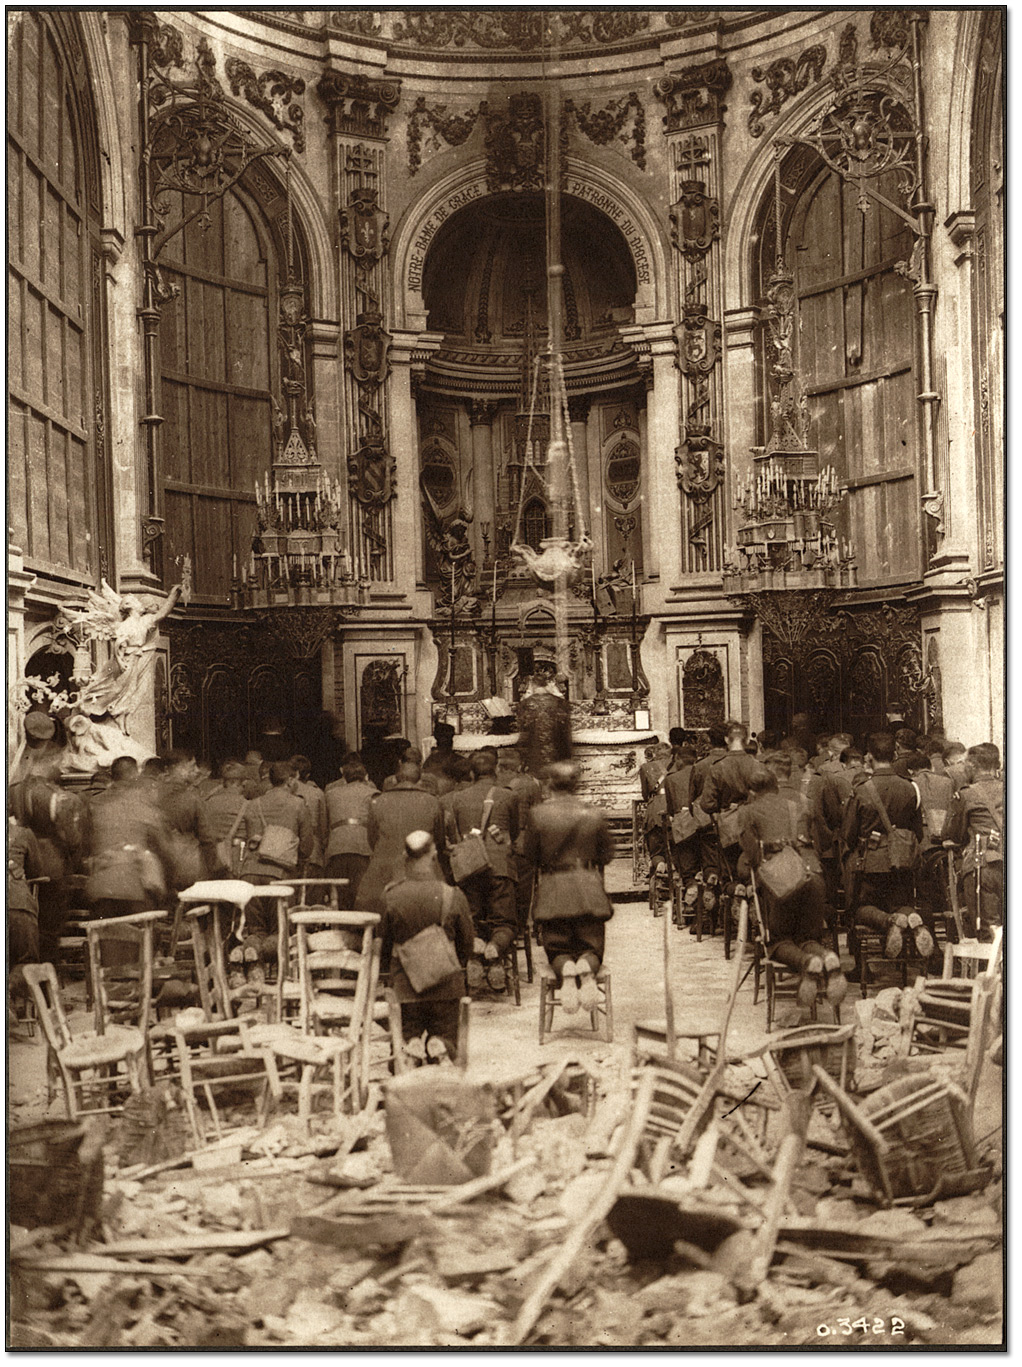 [Thanksgiving_Service_Attended_by_Canadian_Troops_Being_Held_in_the_Cambrai_Cathedral.jpg]